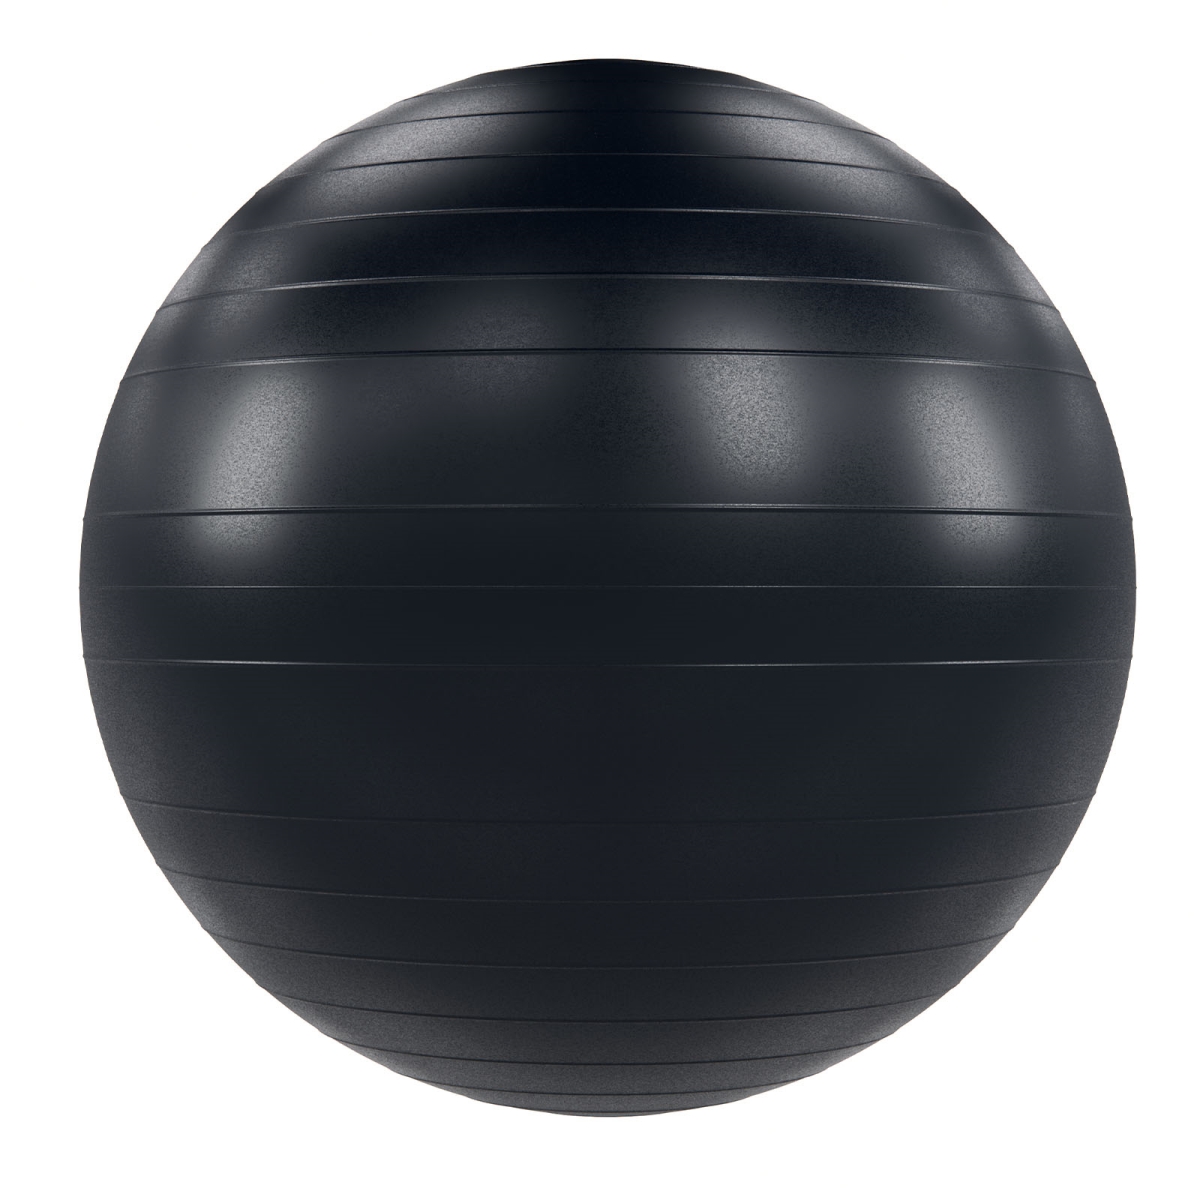 Picture of Power Systems 80759 VersaBall Pro 75cm - Black